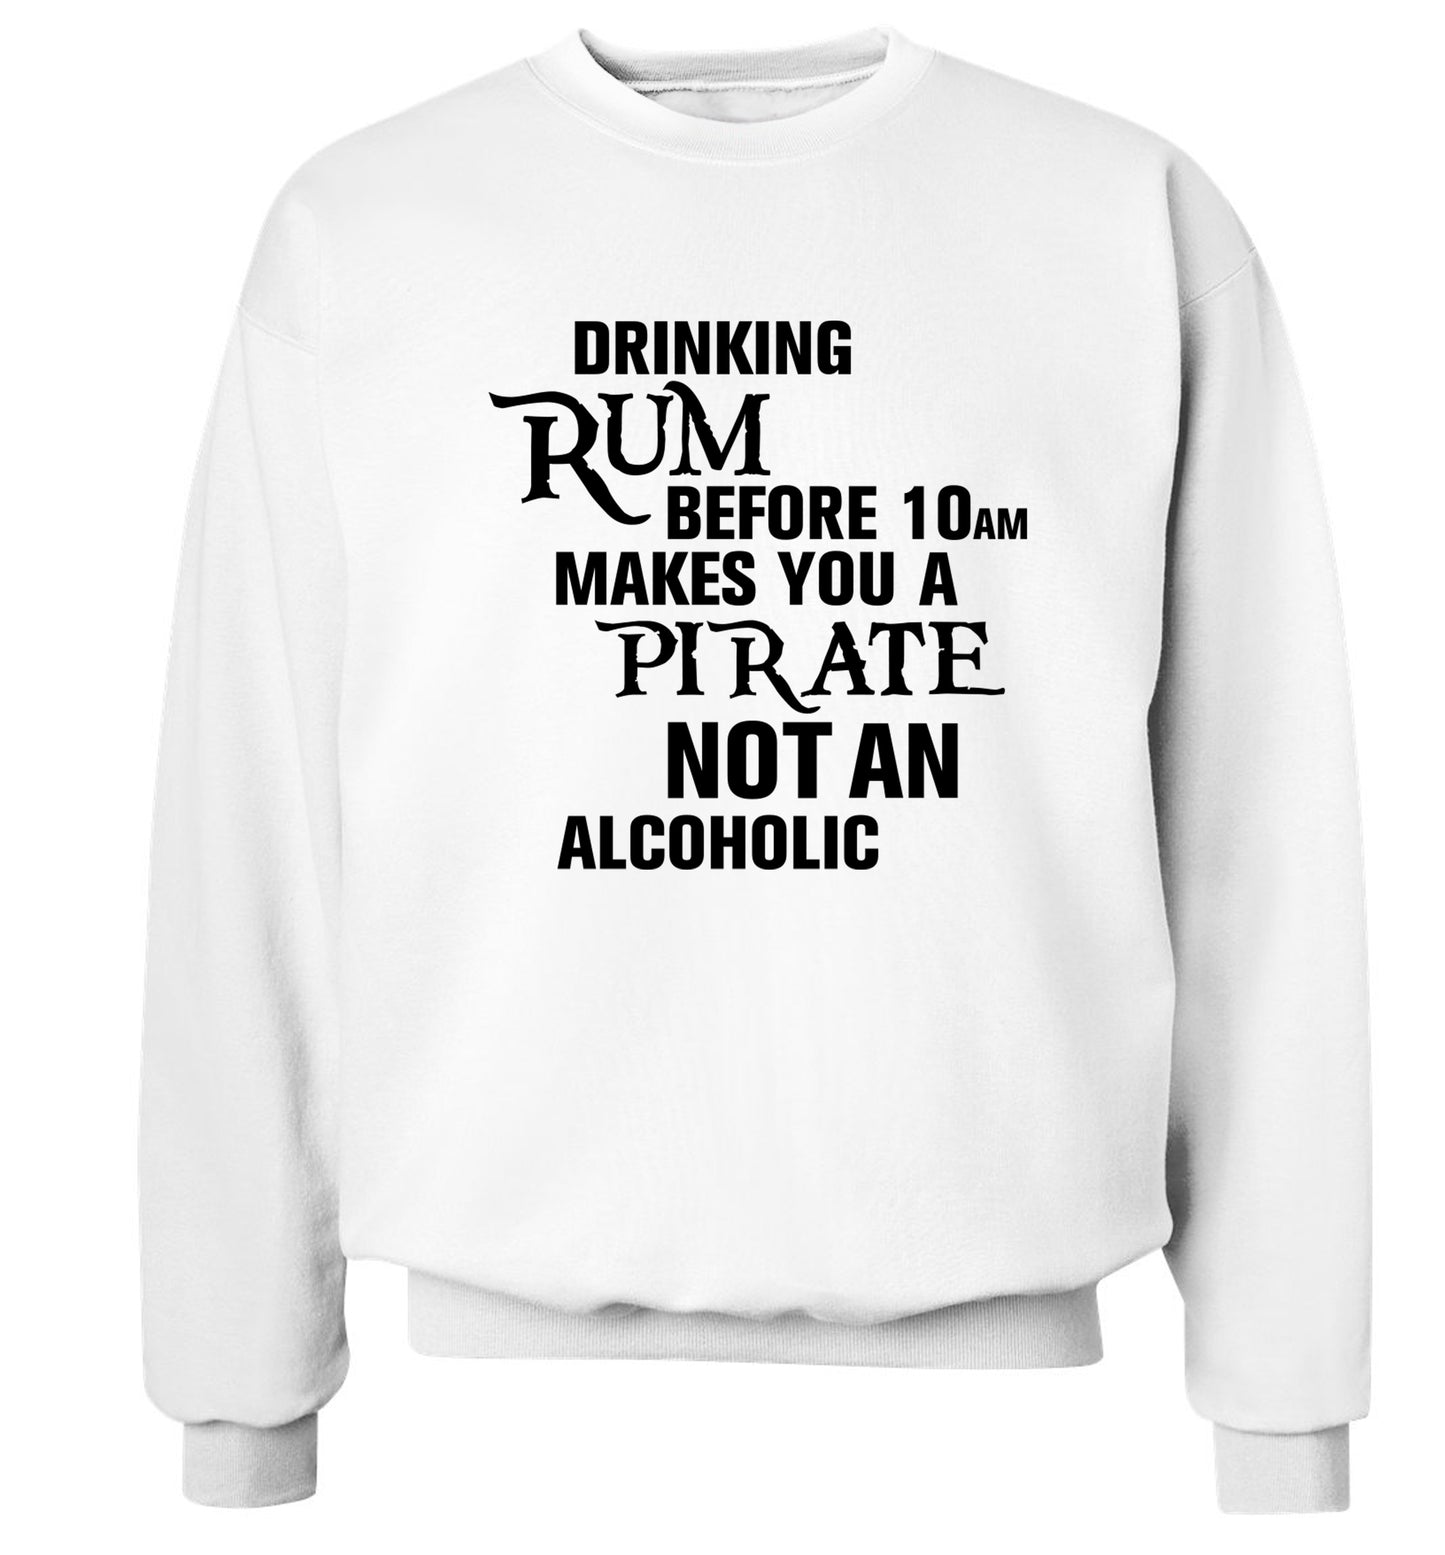 Drinking rum before 10AM makes you a pirate not an alcoholic Adult's unisex white Sweater 2XL